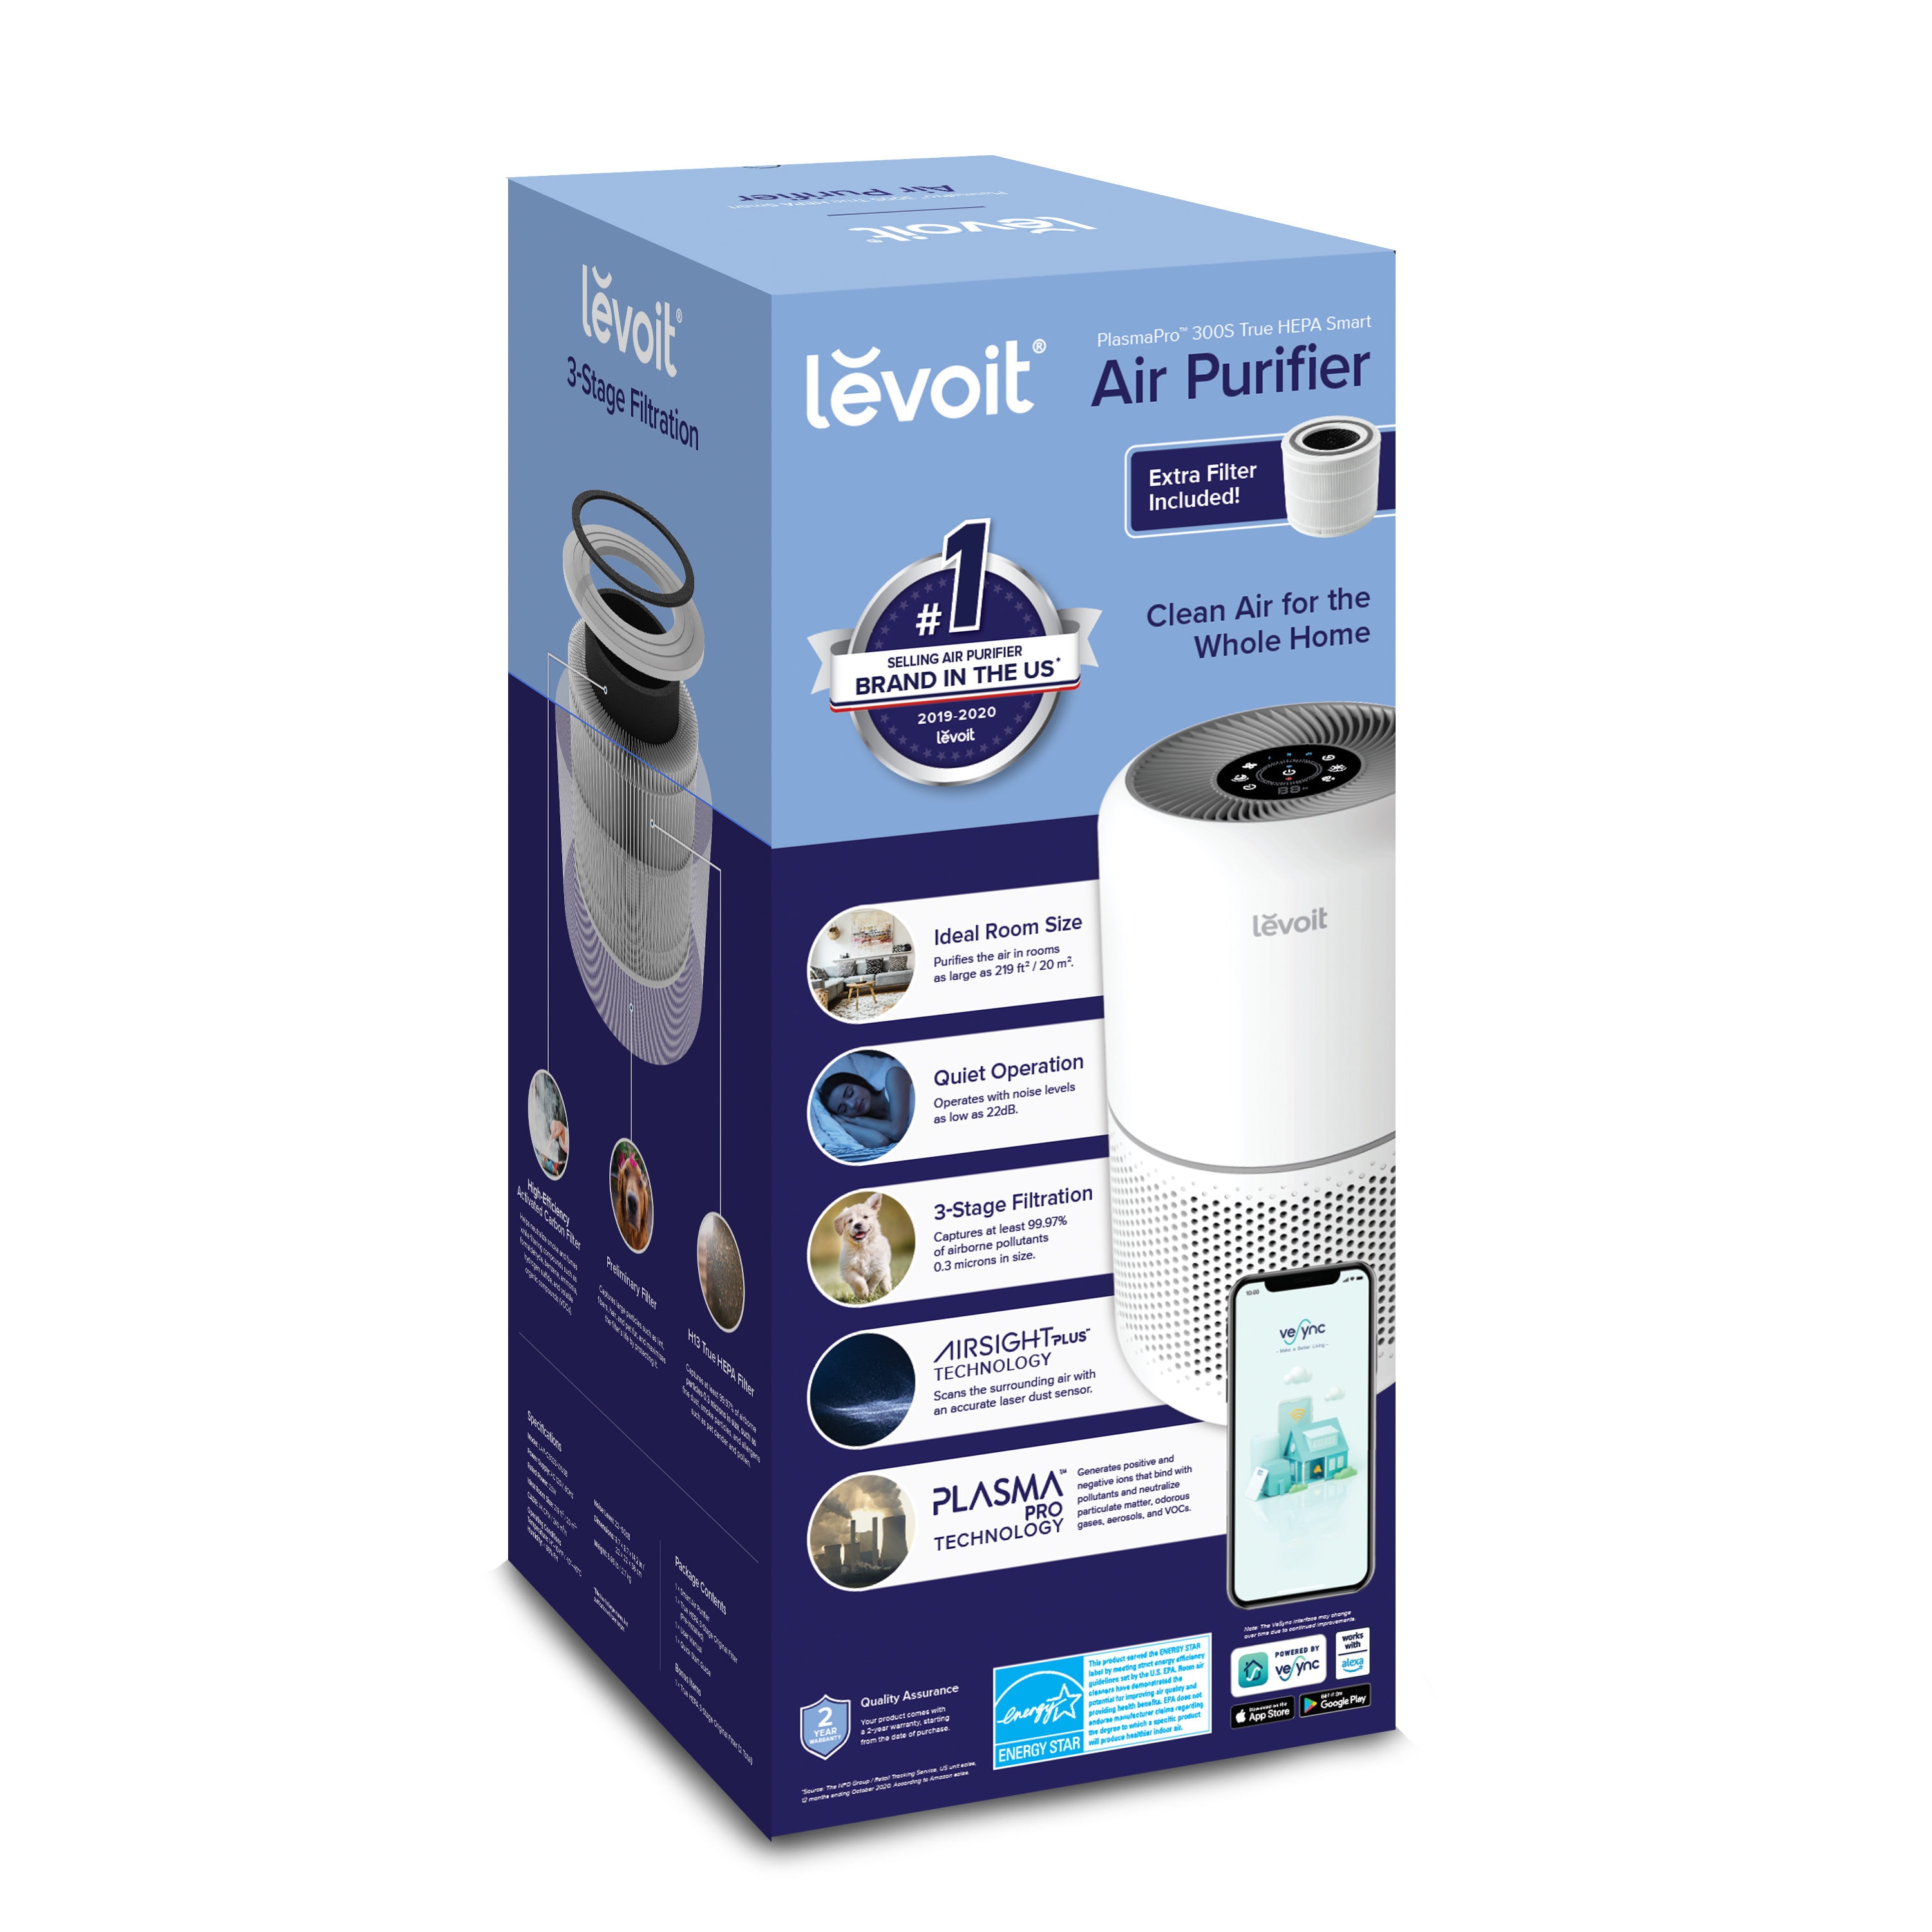 Levoit LV-H135: True HEPA Air Purifier for Home Large Room - VeSync Store